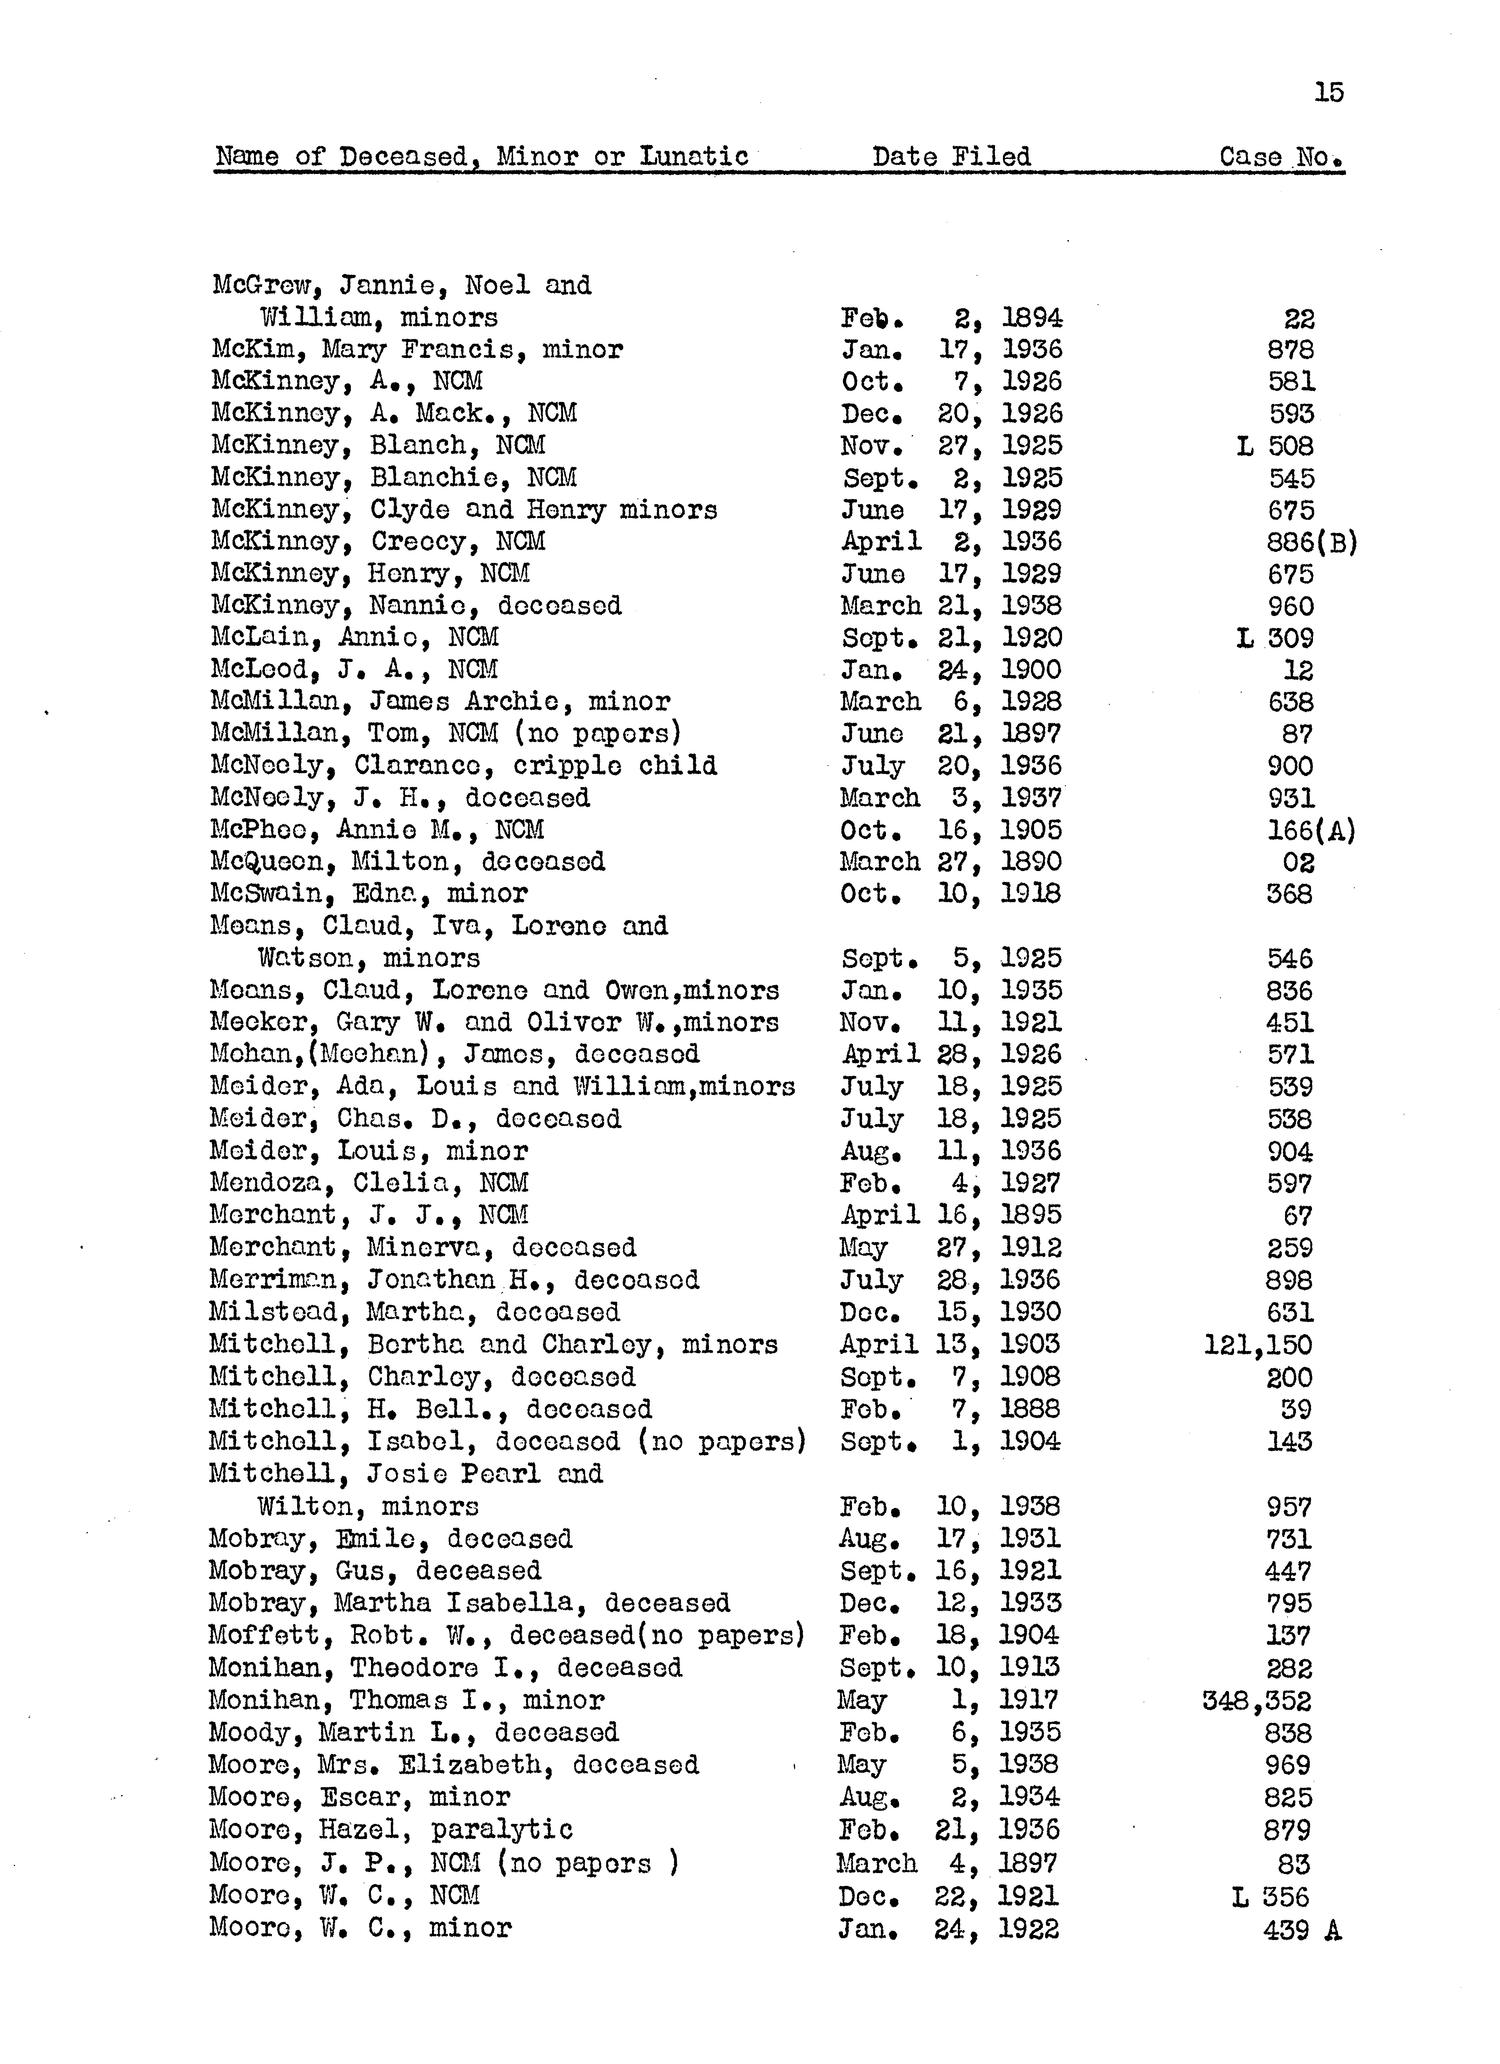 Index to Probate Records of Texas: Number 100, Hardin County, September 9, 1867-March 18, 1939
                                                
                                                    15
                                                